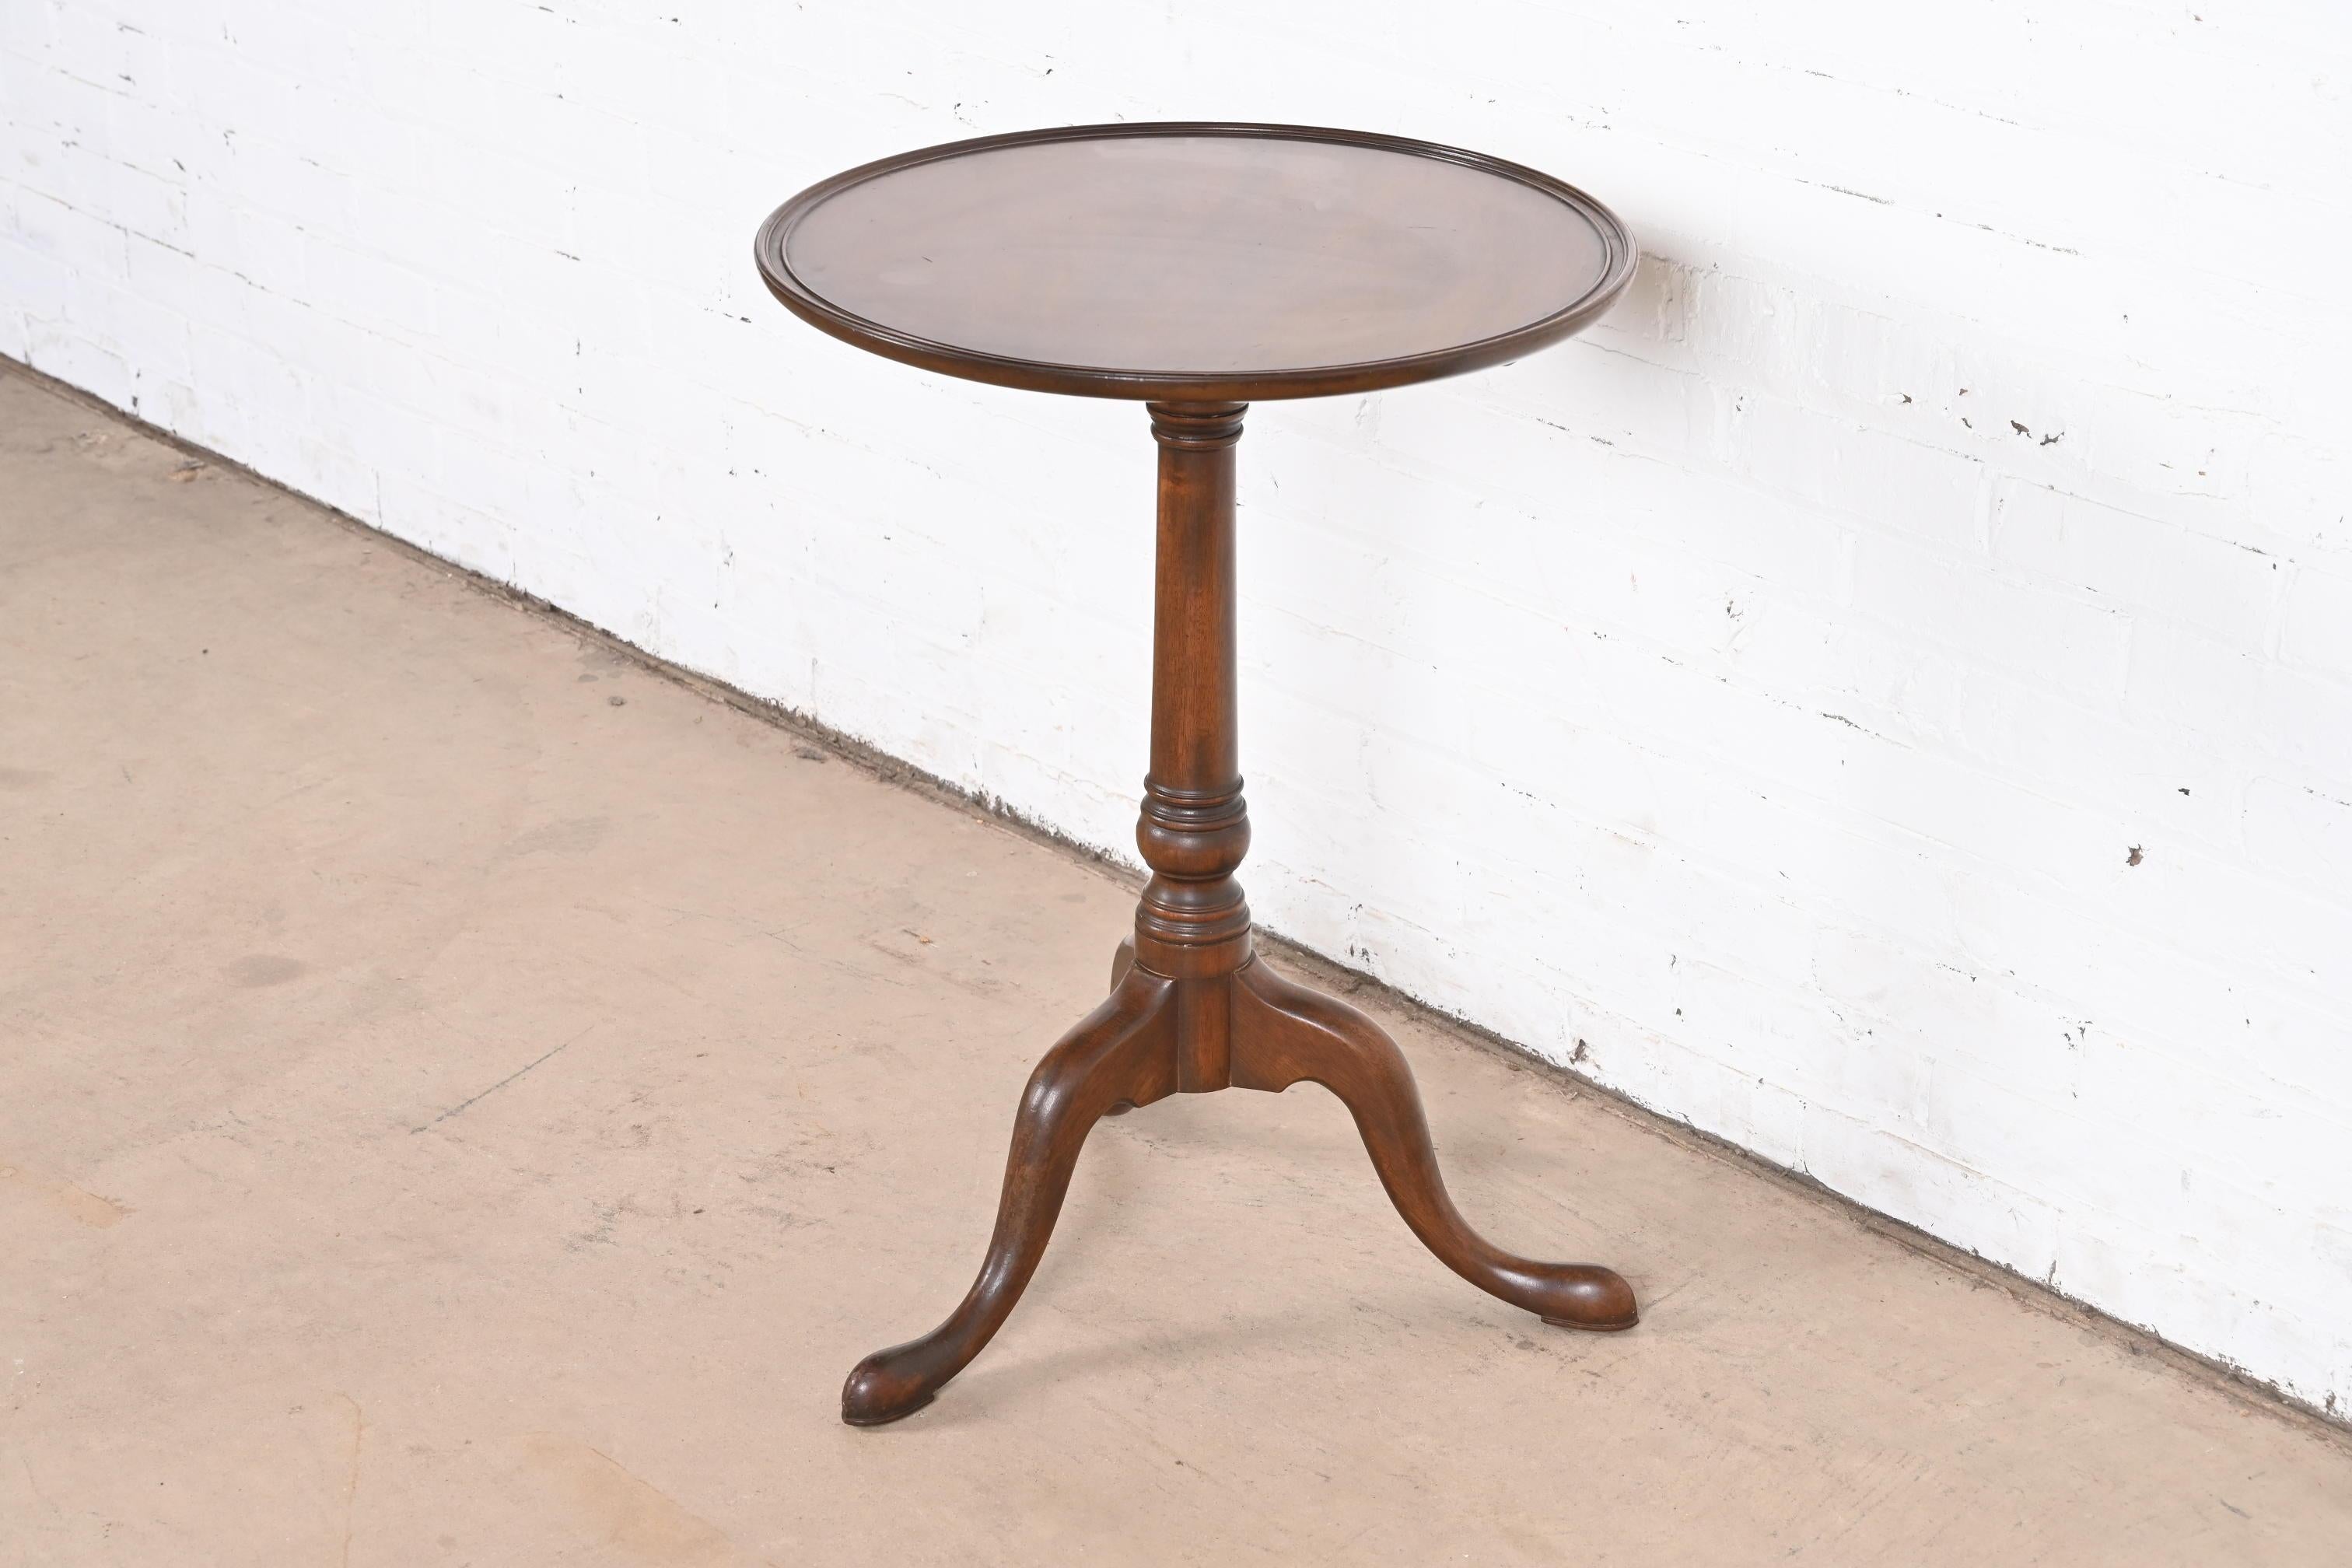 Kittinger Georgian Mahogany Pedestal Tea Table, Circa 1960s In Good Condition For Sale In South Bend, IN